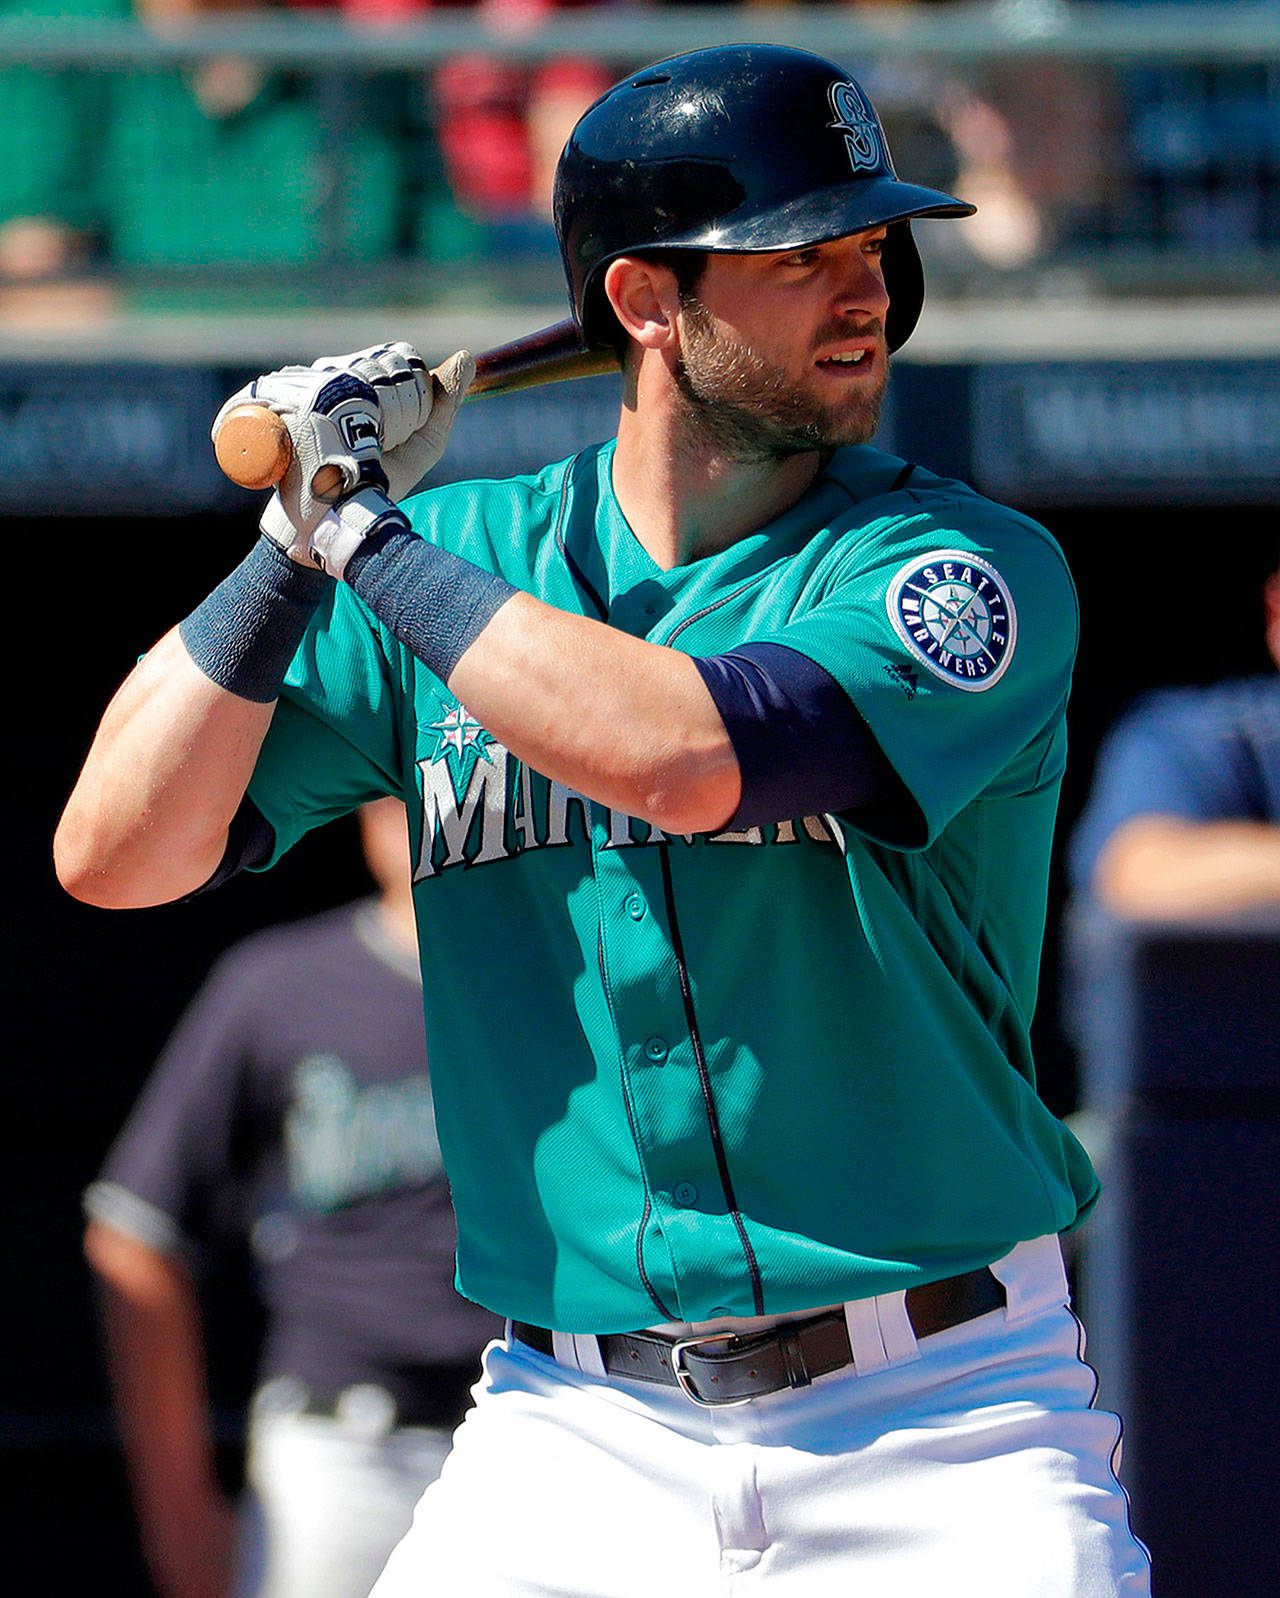 This March 6, 2017, photo shows Seattle Mariners’ Mitch Haniger batting during the first inning of a spring-training game against the Texas Rangers in Peoria, Arizona. Haniger is rated as the No. 9 right fielder in baseball by mlb.com. (AP Photo/Matt York)